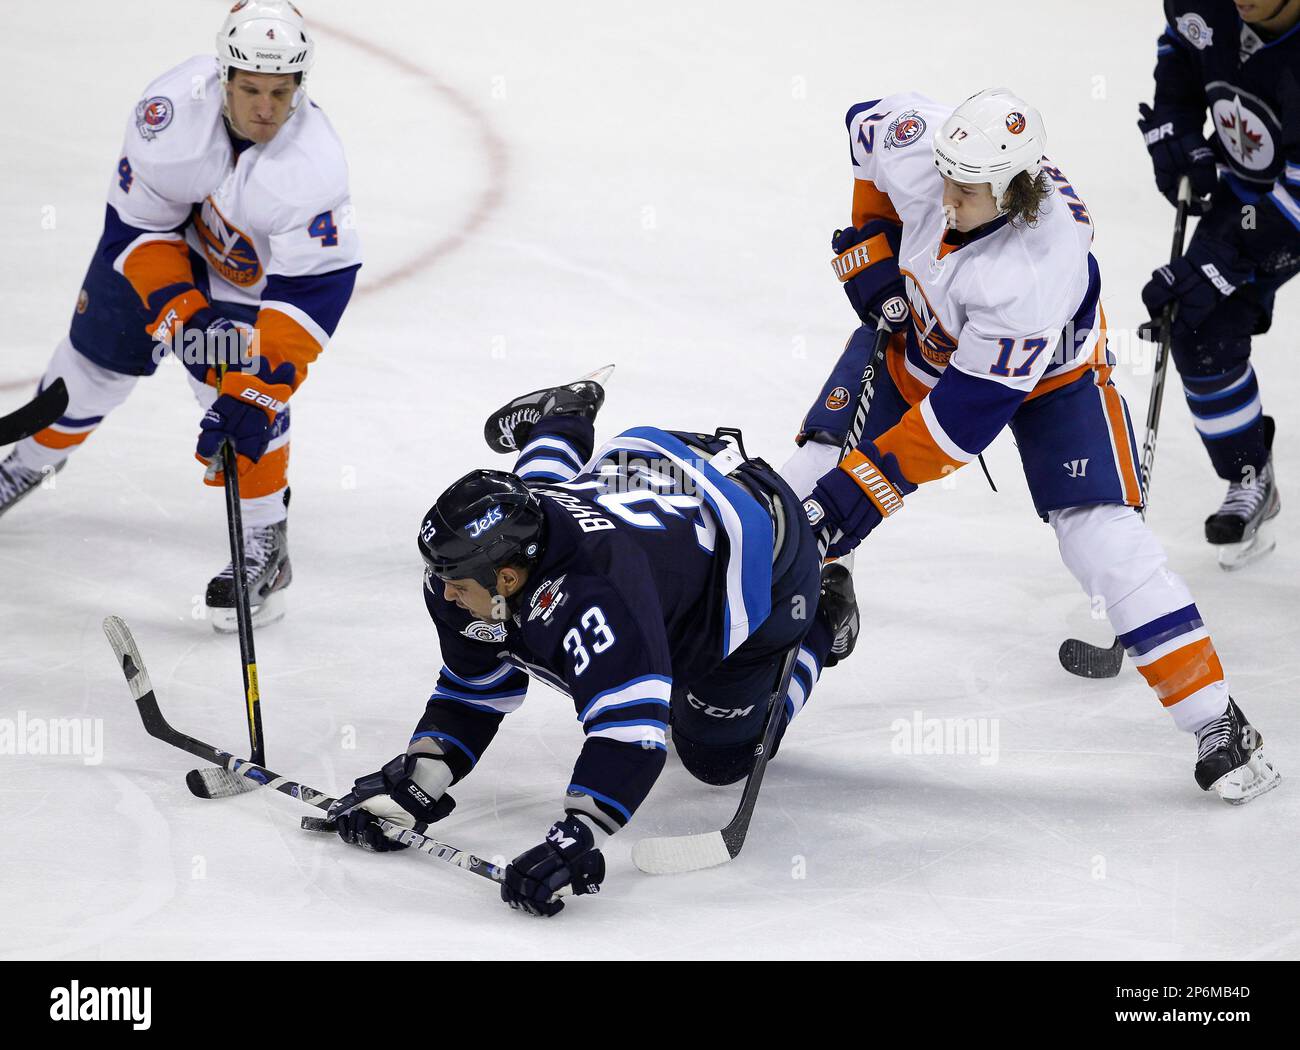 Winnipeg Jets' Dustin Byfuglien (33) stands up to a check by